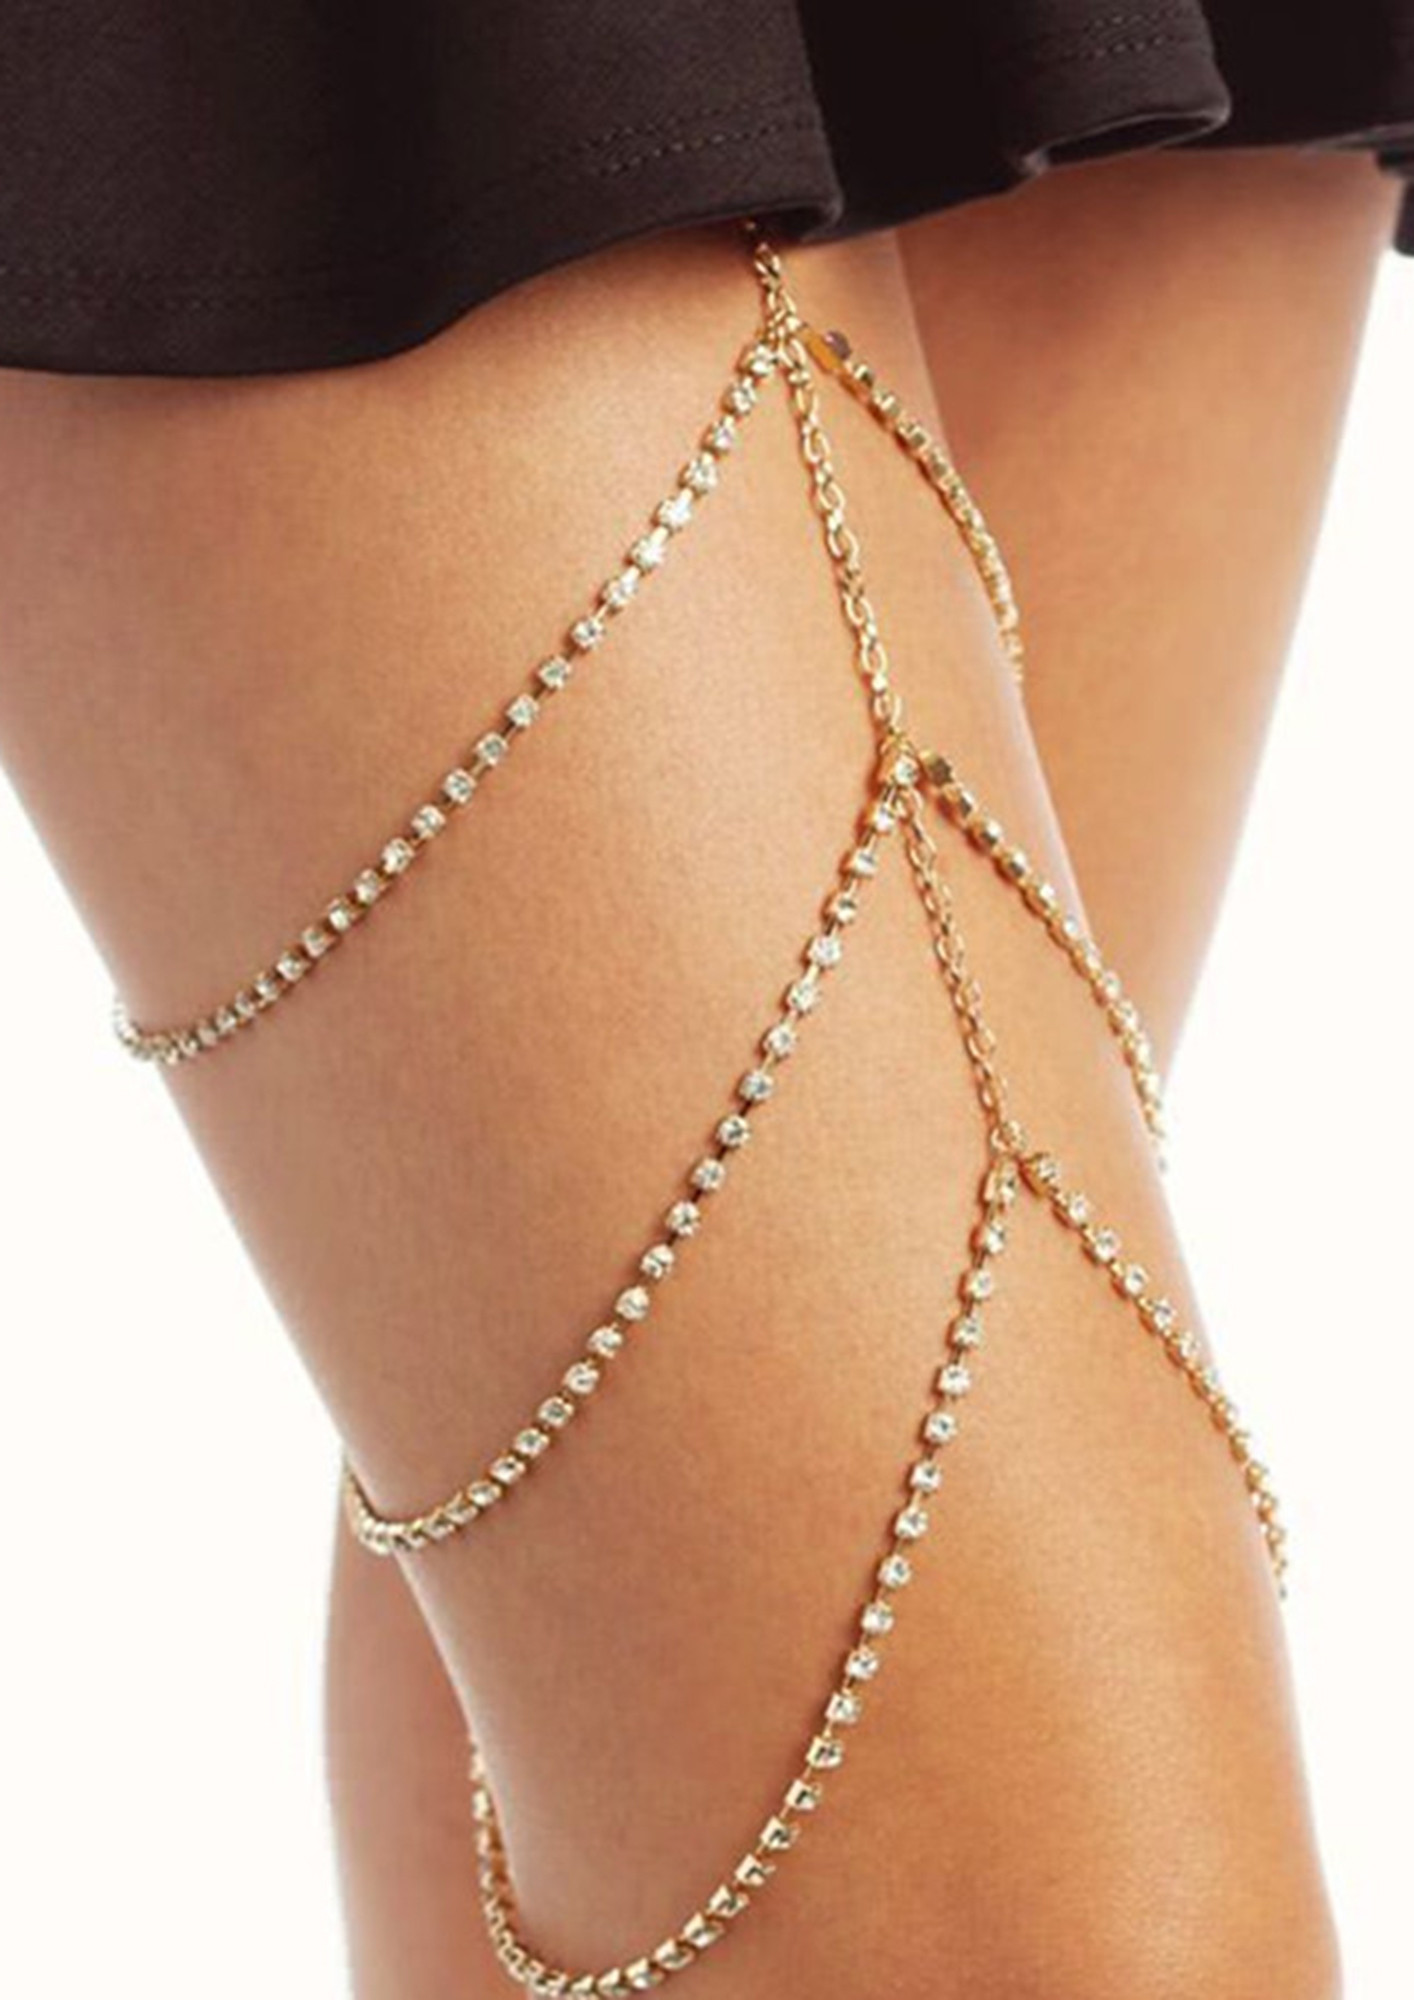 A TOUCH OF PRETTY GOLDEN THIGH CHAIN